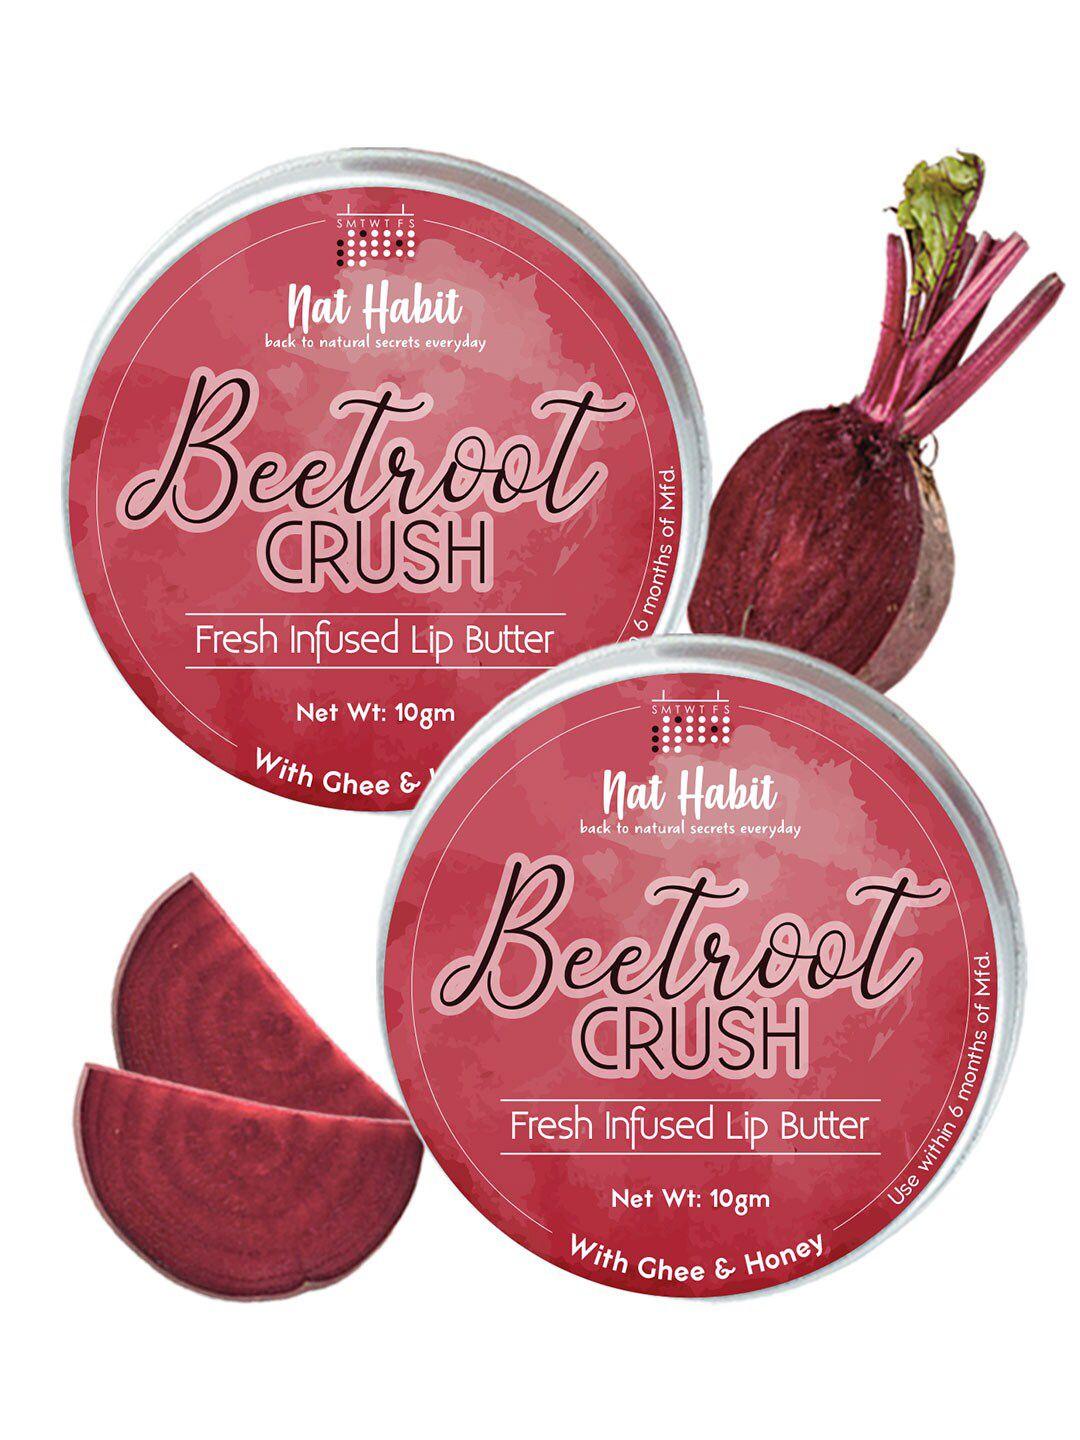 nat habit set of 2 beetroot crush fresh infused lip butter with ghee & honey - 10 g each